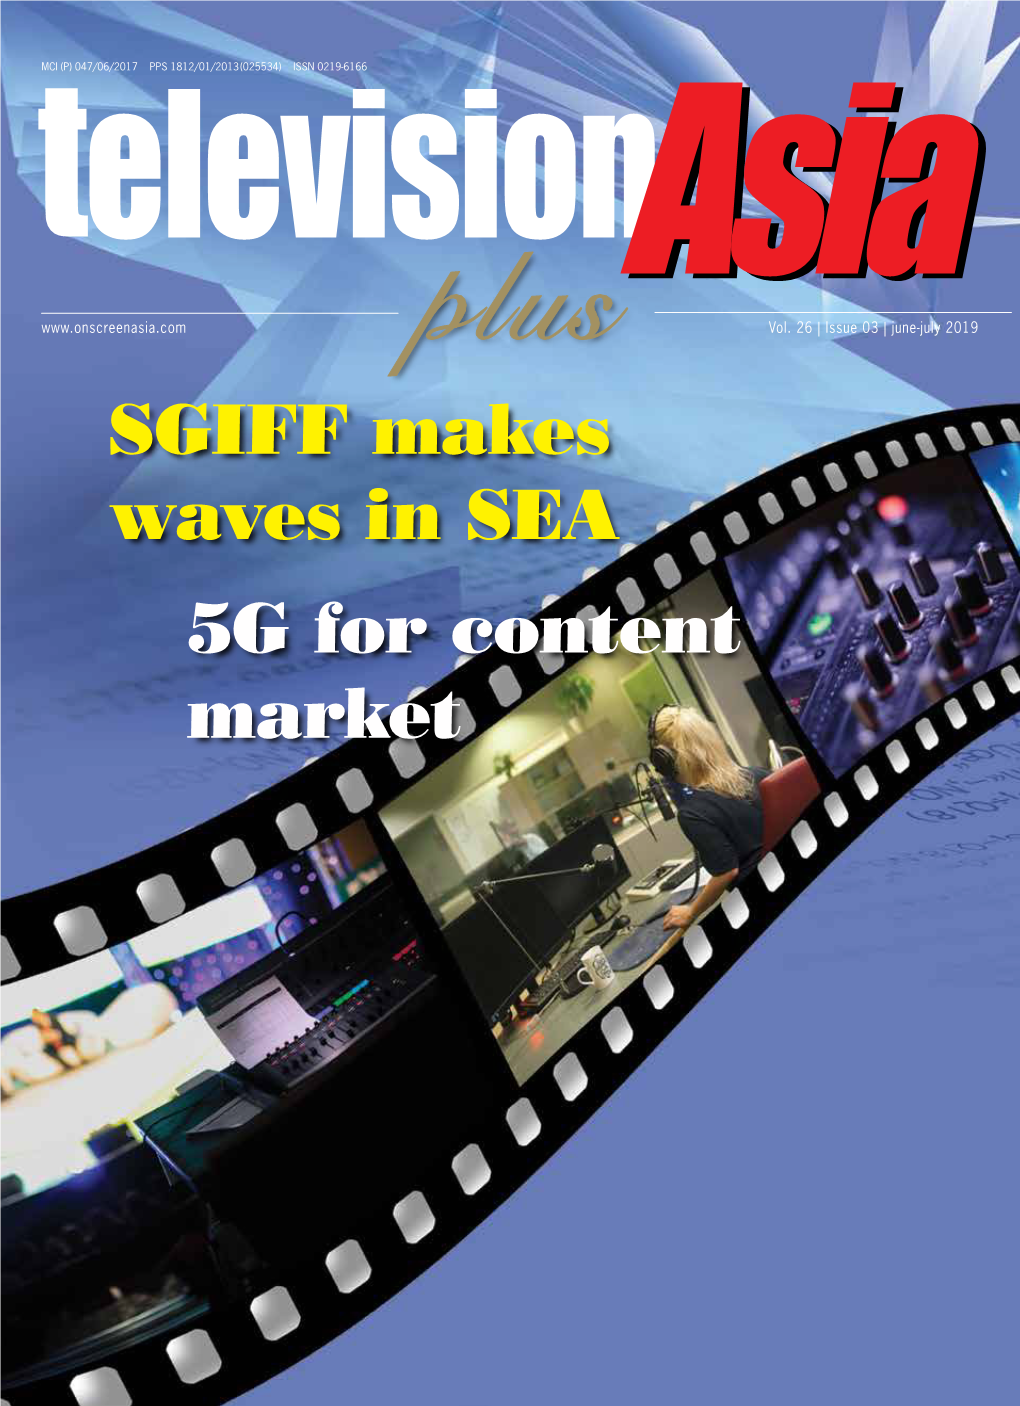 SGIFF Makes Waves in SEA 5G for Content Market